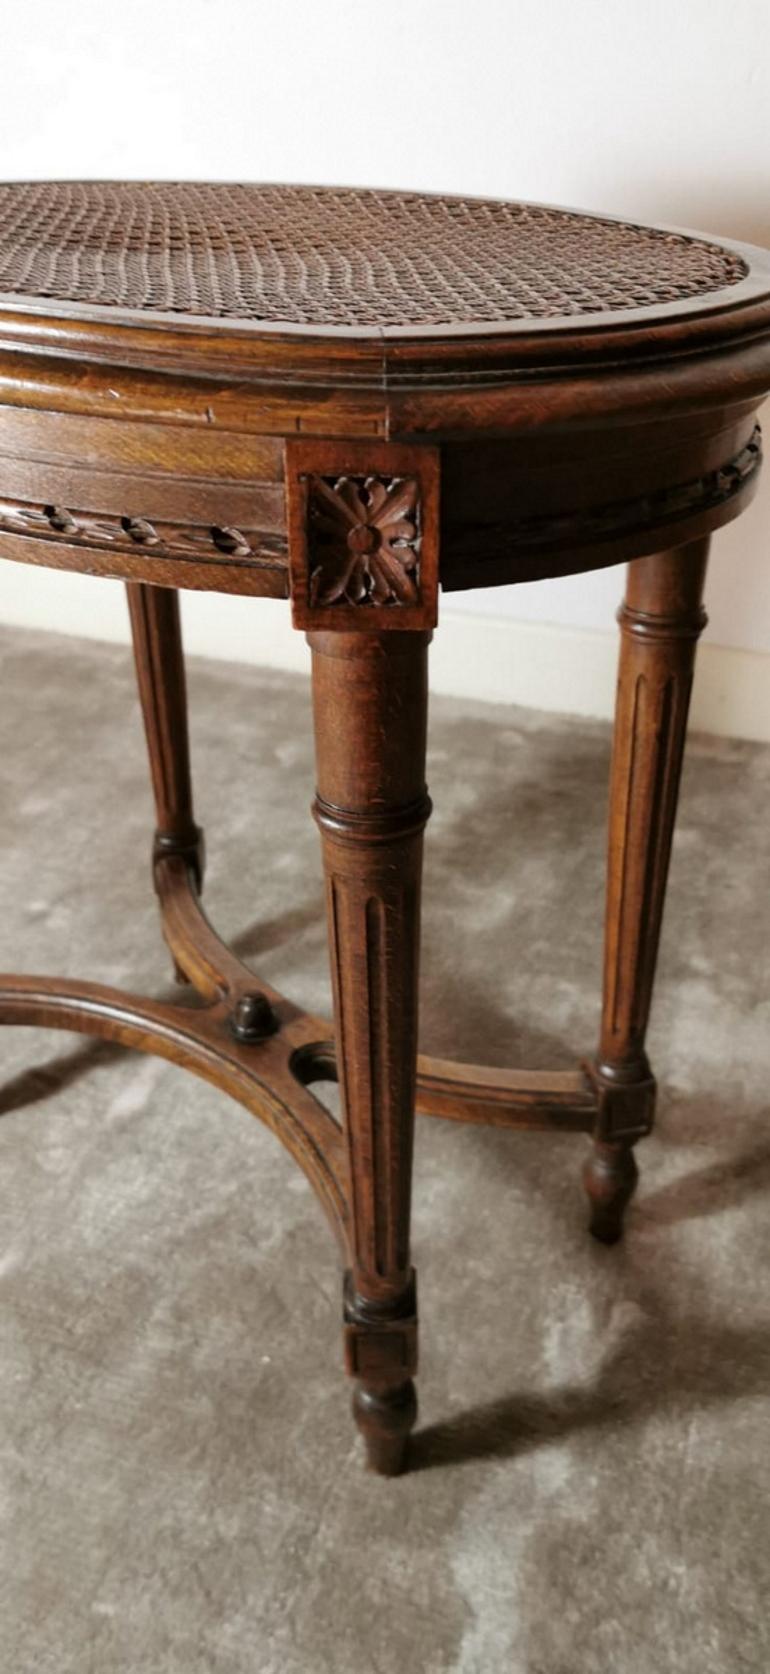 Louis XVI Style Wooden Stool with 